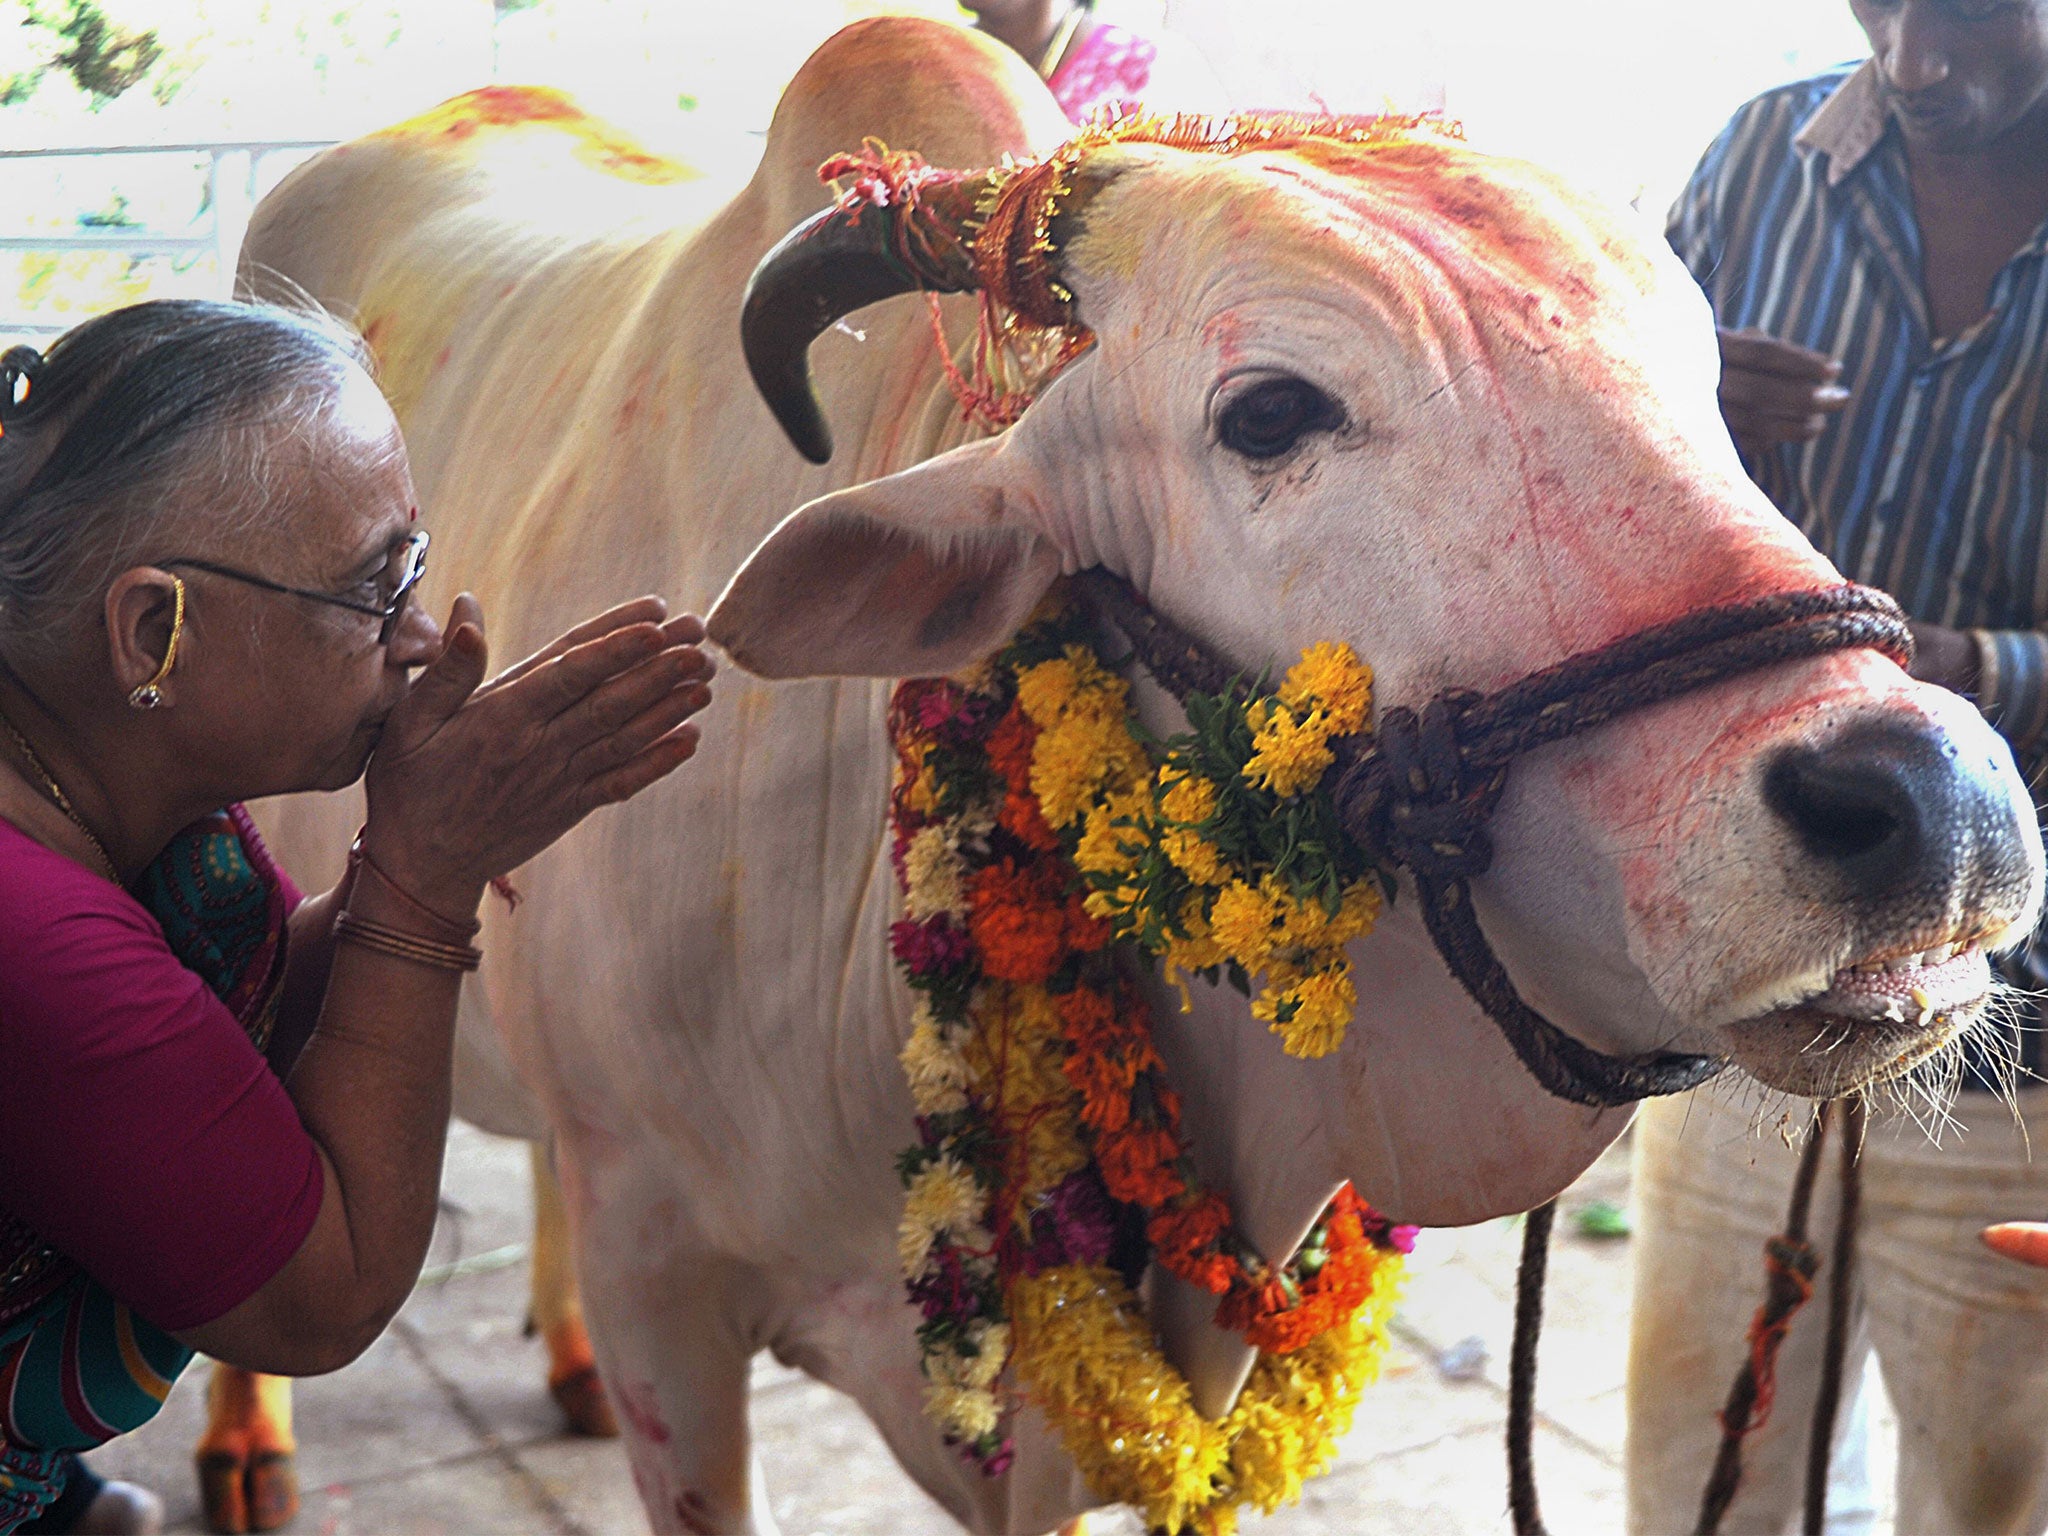 Cows are considered sacred by large swathes of India's population [stock image]